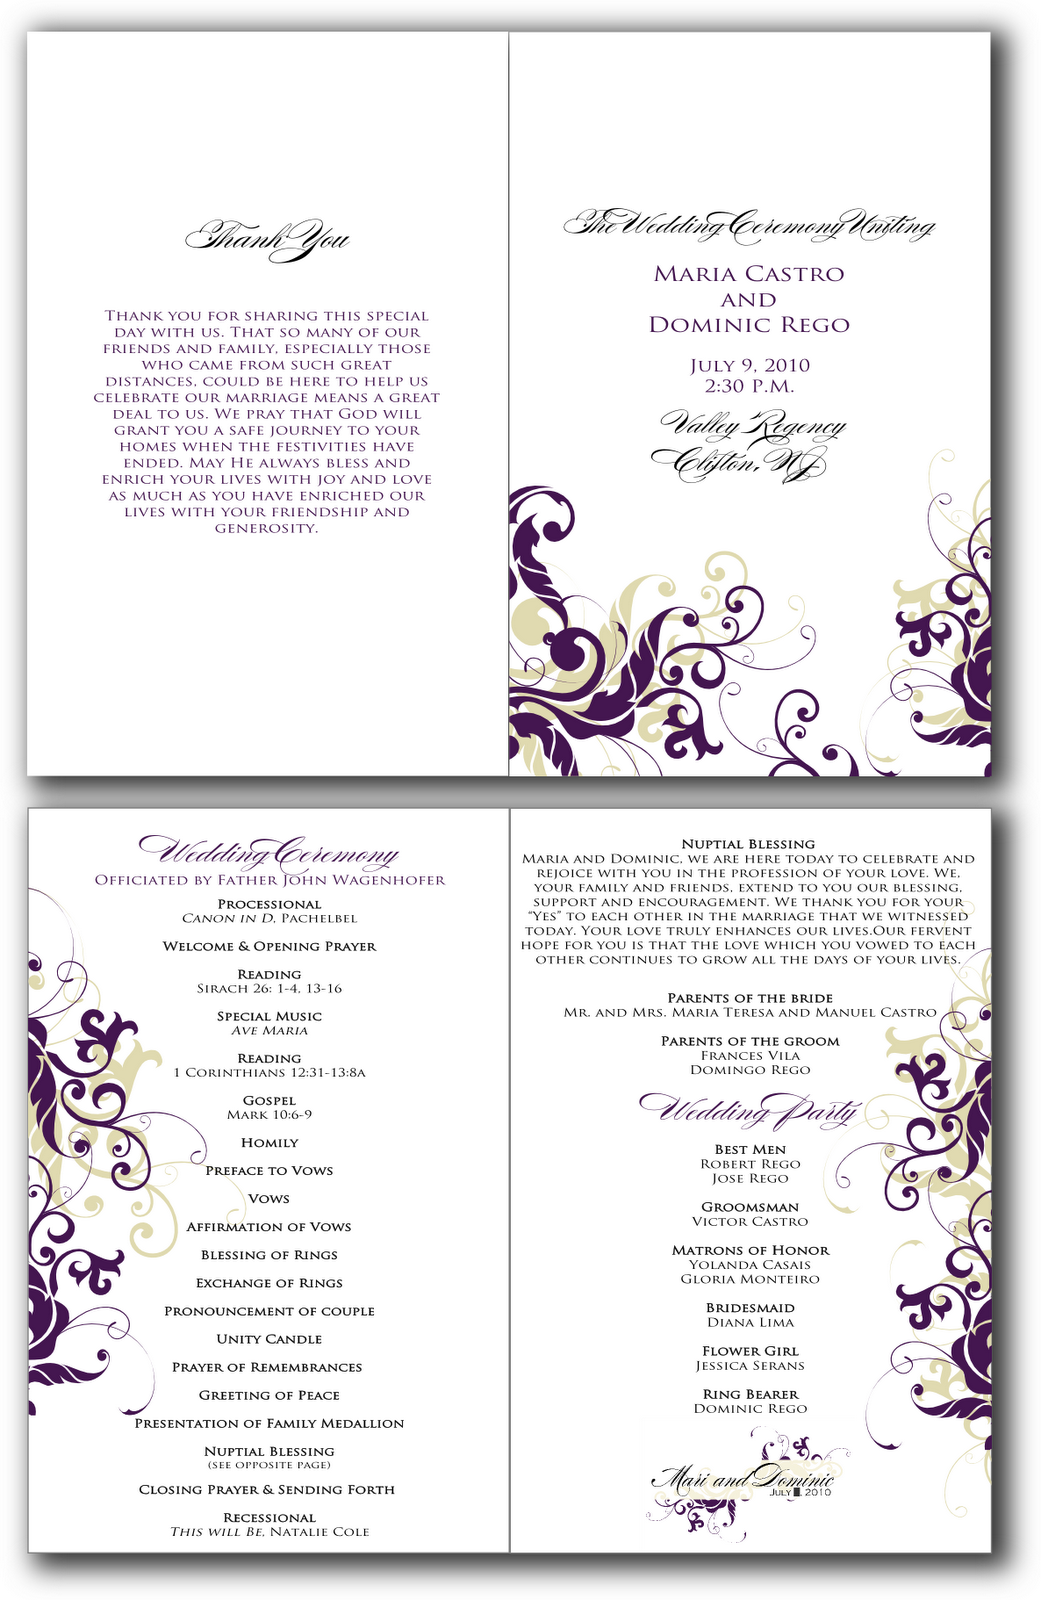 Birthday Party Programme Template Free 20 Event Program Samples